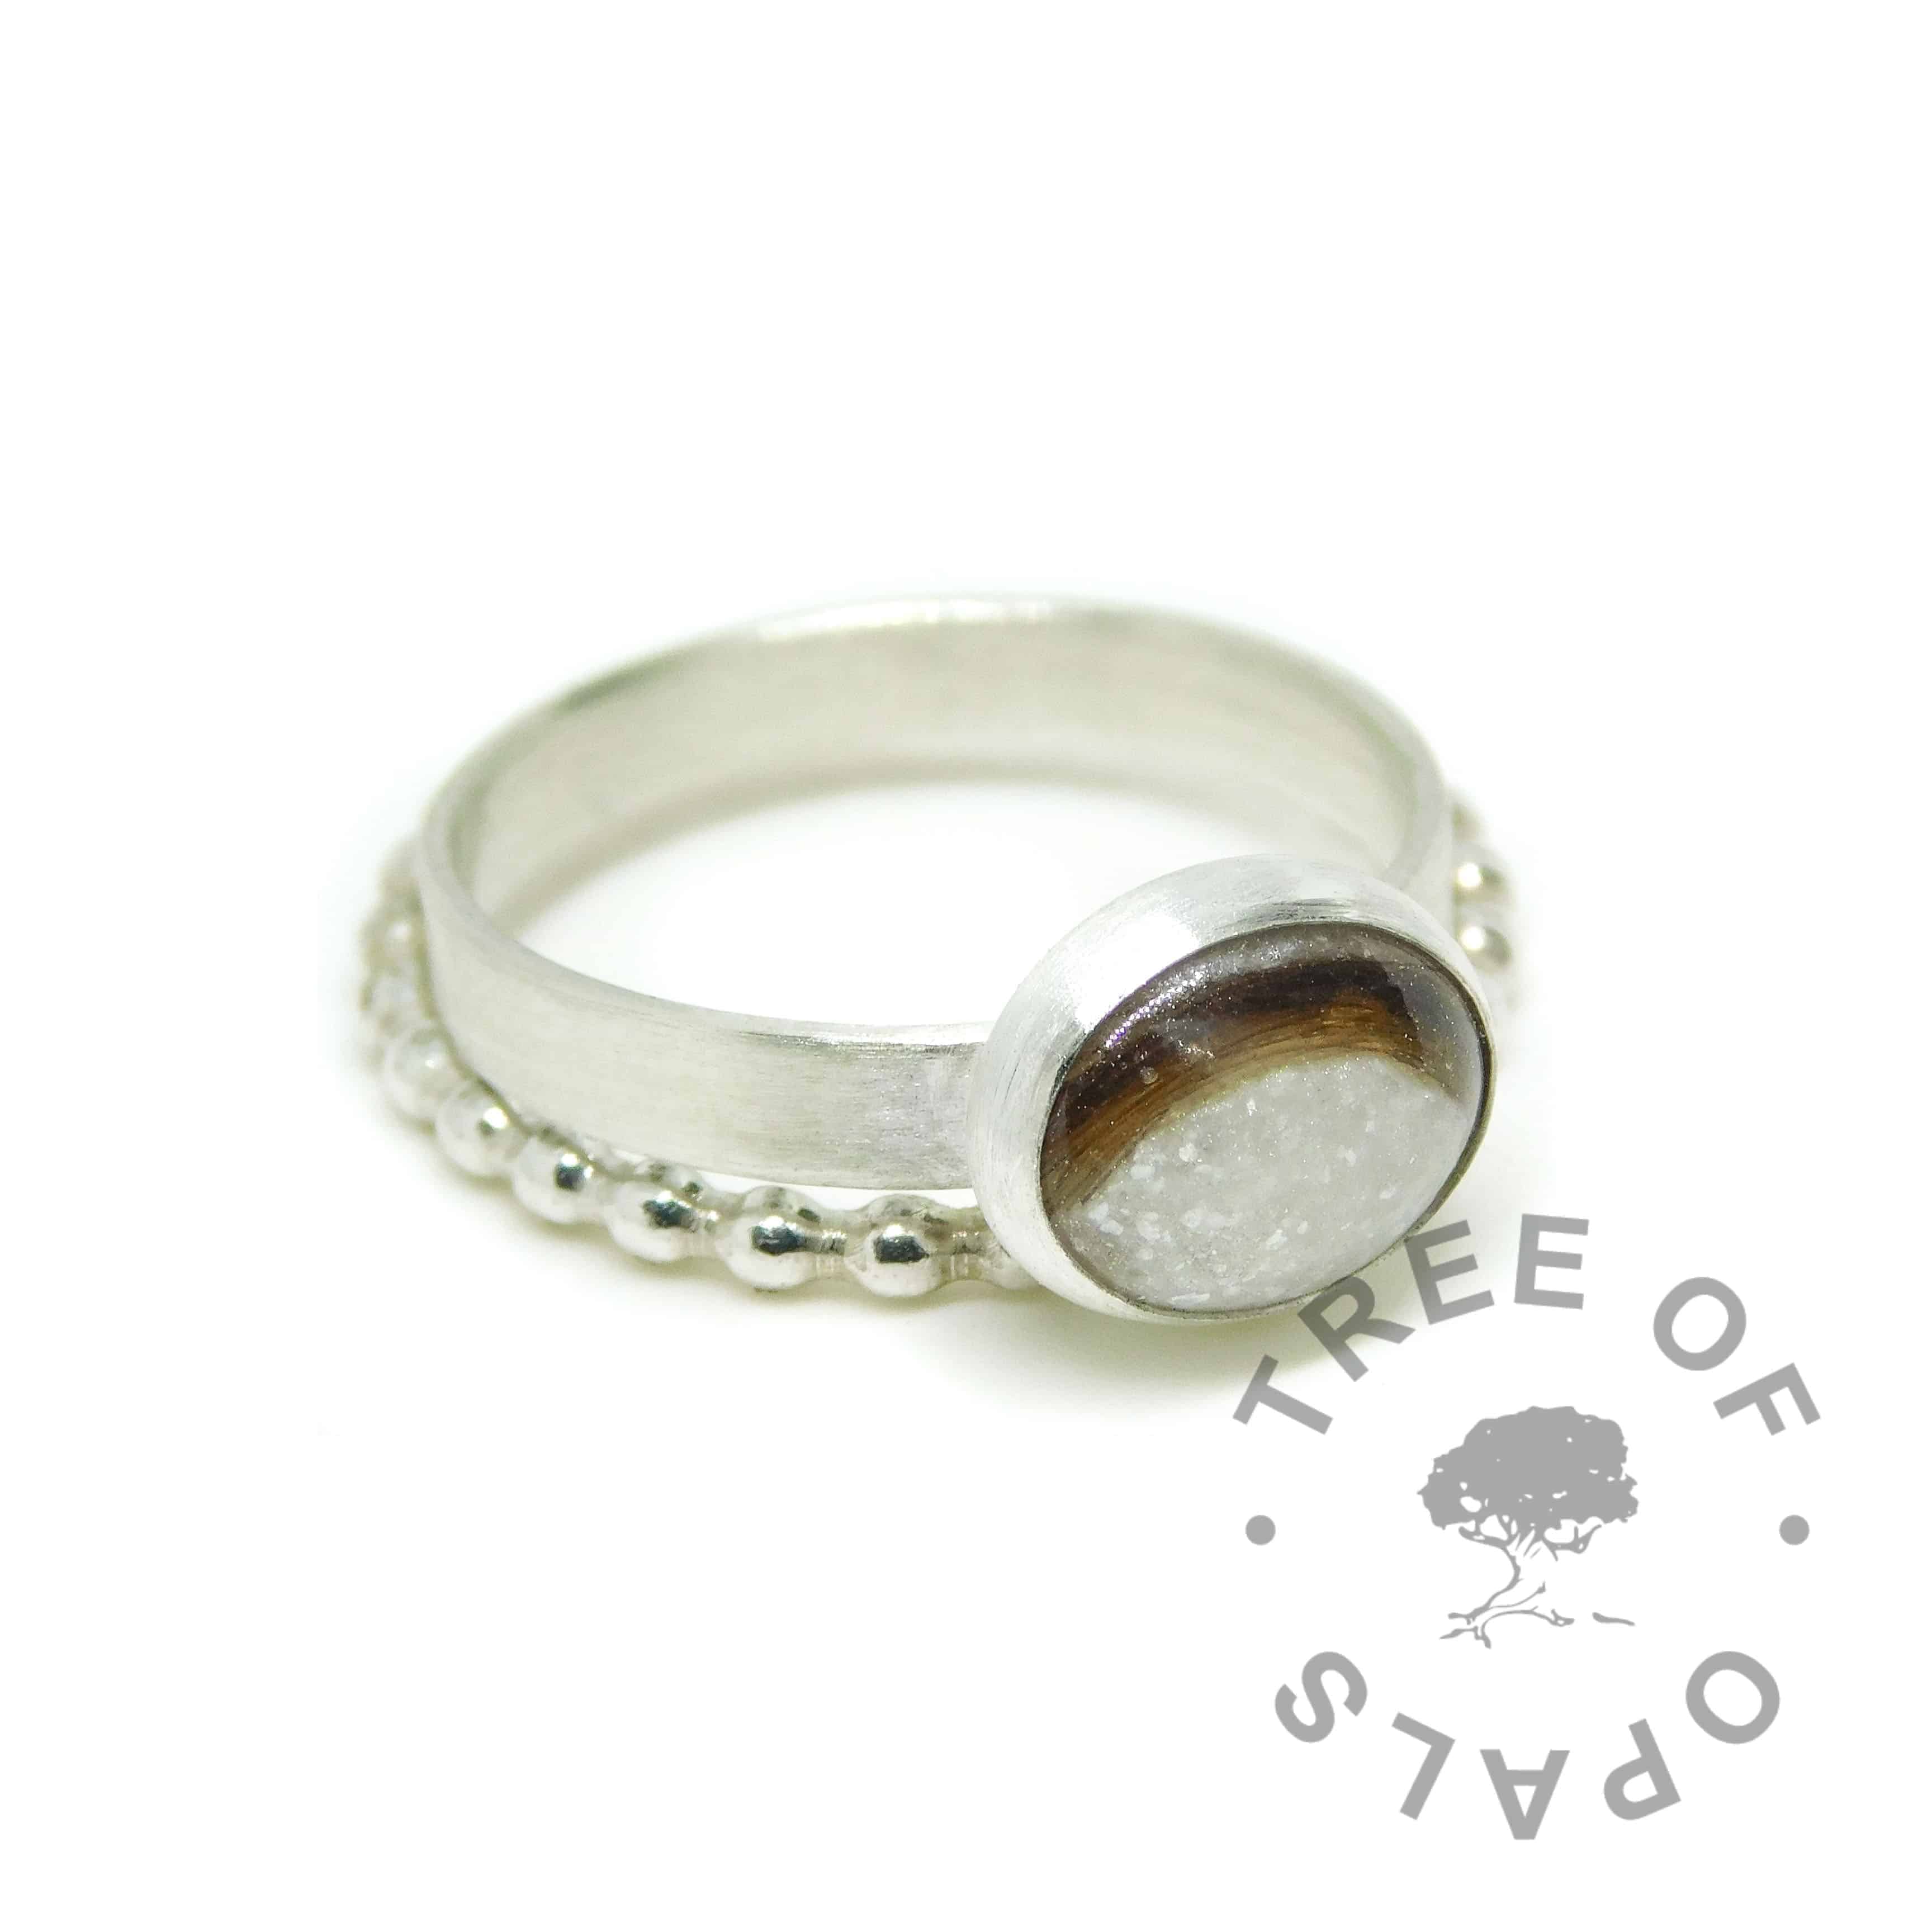 ring stack with unicorn white lock of hair ring with silver leaf on brushed wire band with bubble wire stacking ring. Solid 925 sterling EcoSilver and 935 argentium silver handmade rings (first curl breastmilk ring mockup). 10x8mm bezel cup rubbed over the cabochon for security.